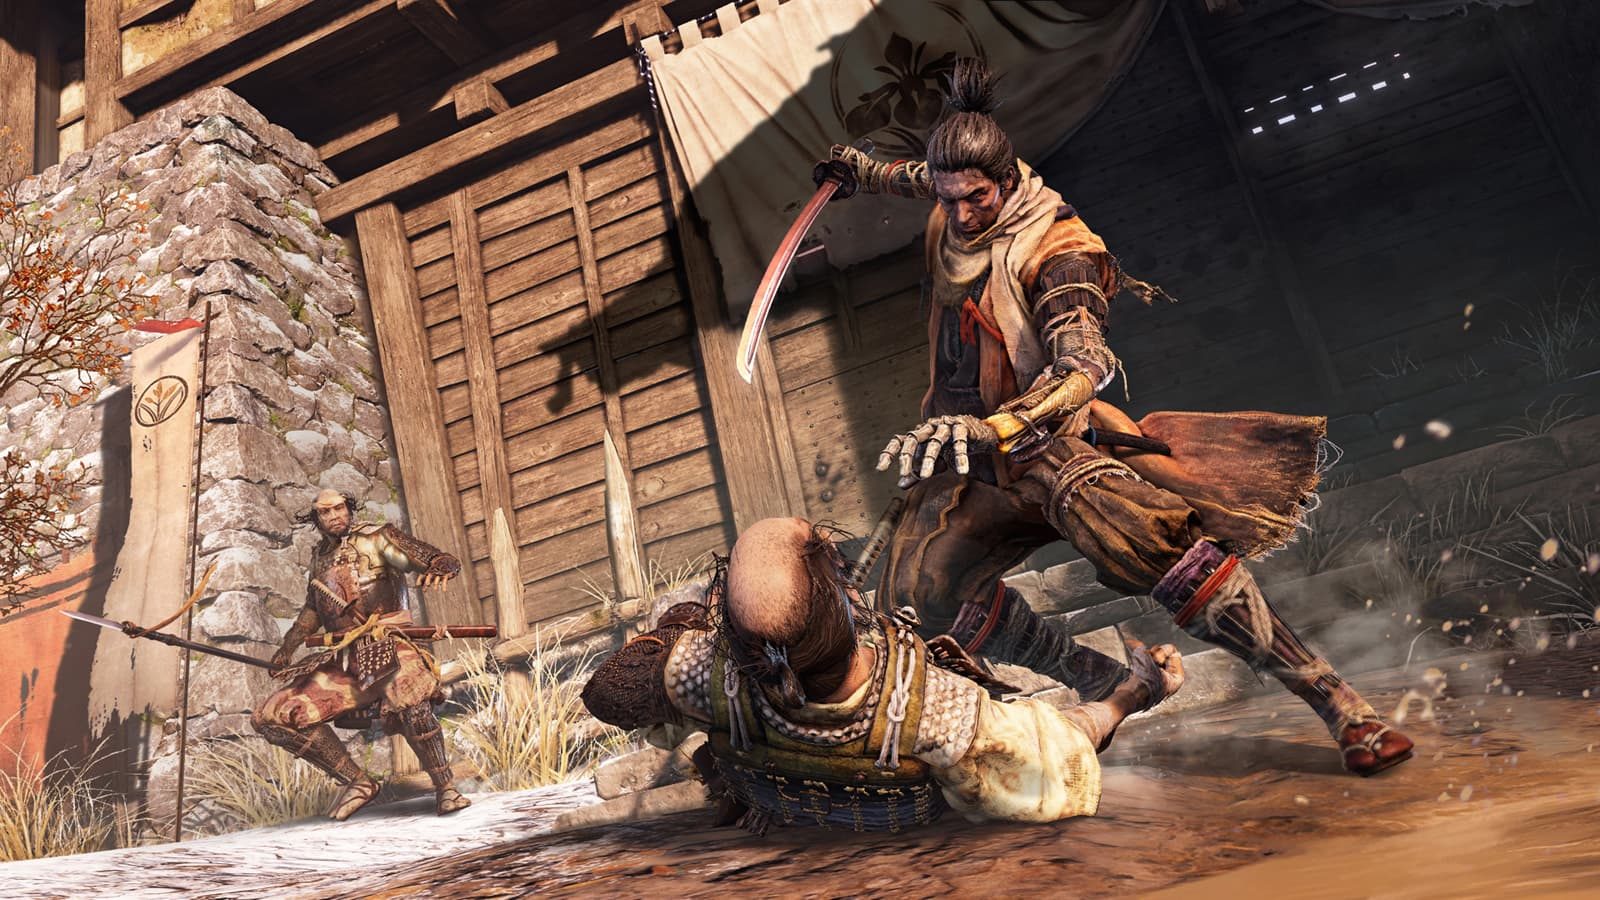 Sekiro: Shadows Die Twice – Exclusive First Hands-on Preview reviews